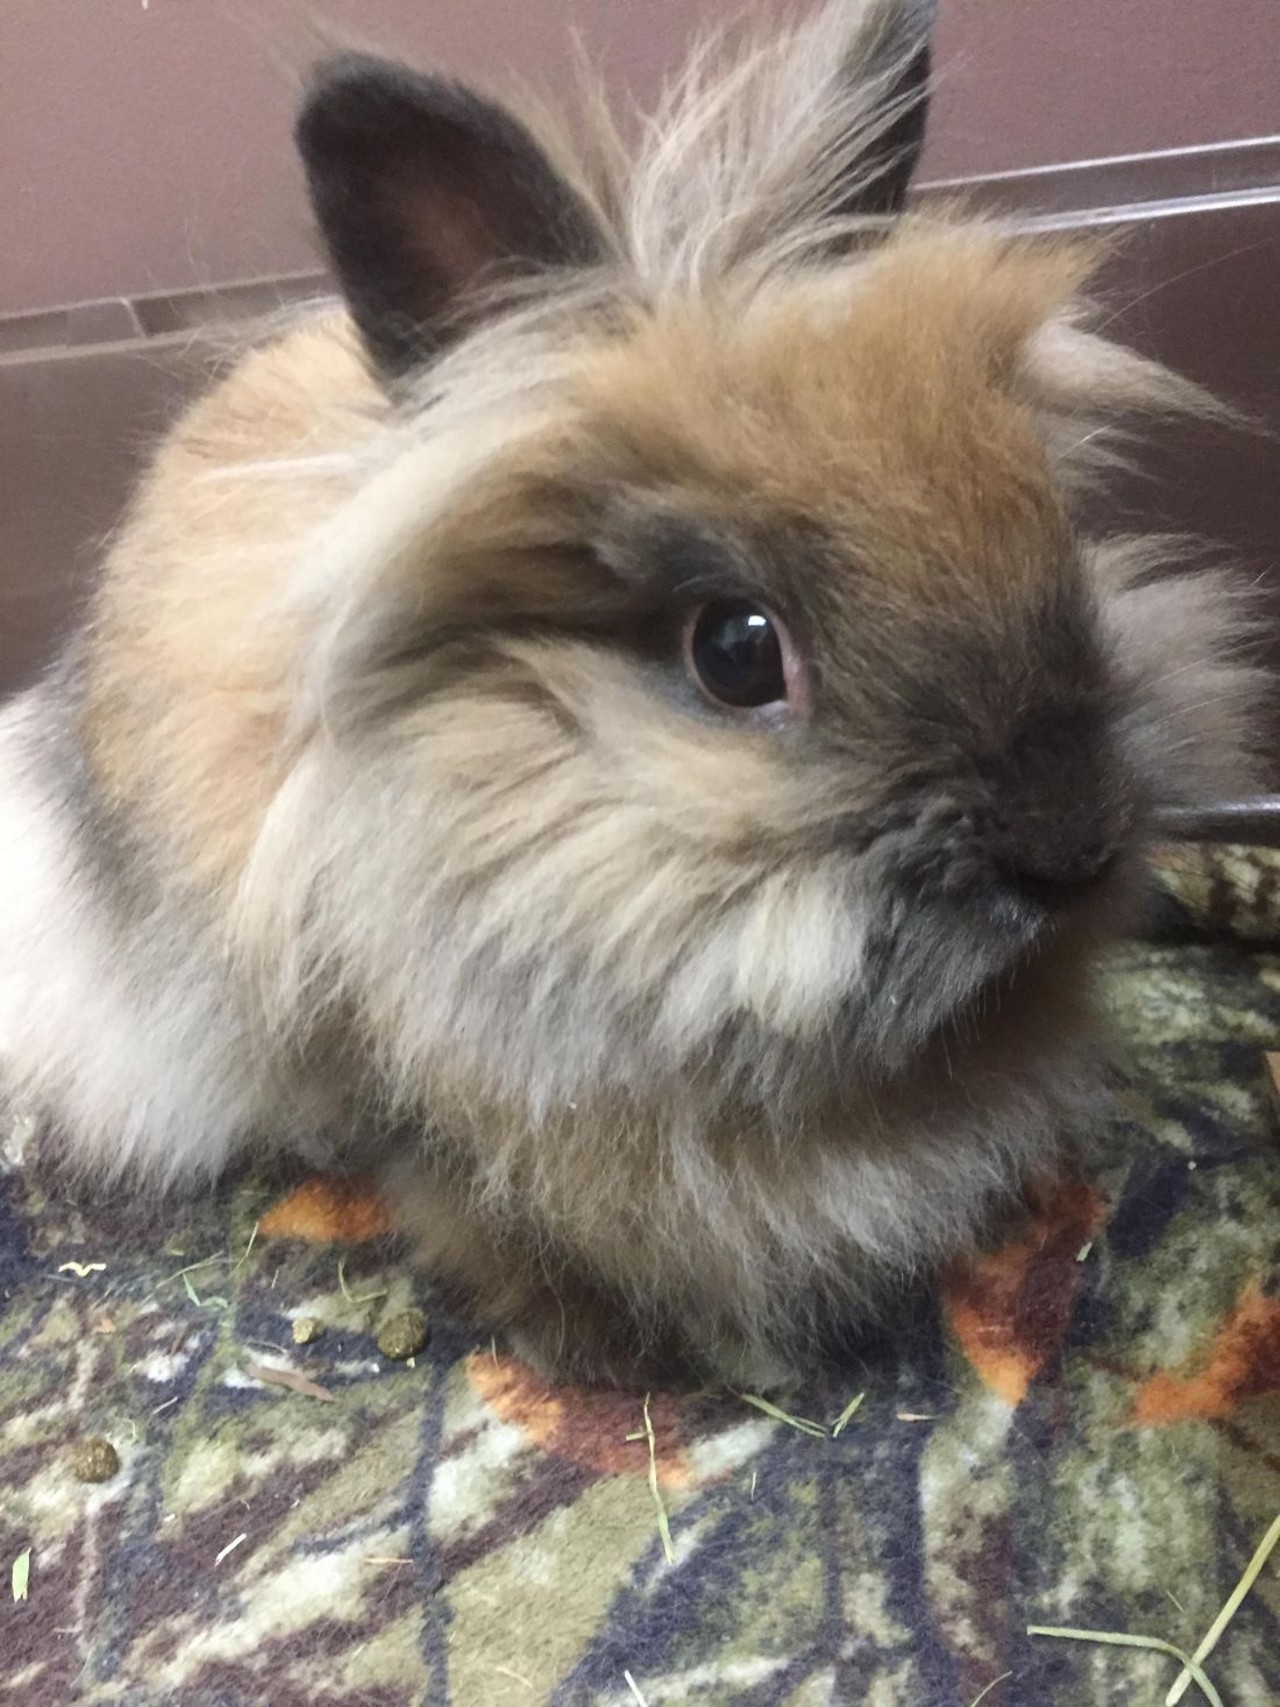 NAME: Hazel
GENDER: Female
BREED: Lionhead
AGE: 1 year, 8 months
WEIGHT: 2.5 pounds
SPECIAL CONSIDERATIONS: Prefers a home with older children
REASON I CAME TO MHS: Owner surrender
LOCATION: Petco of Sterling Heights
ID NUMBER: 860291